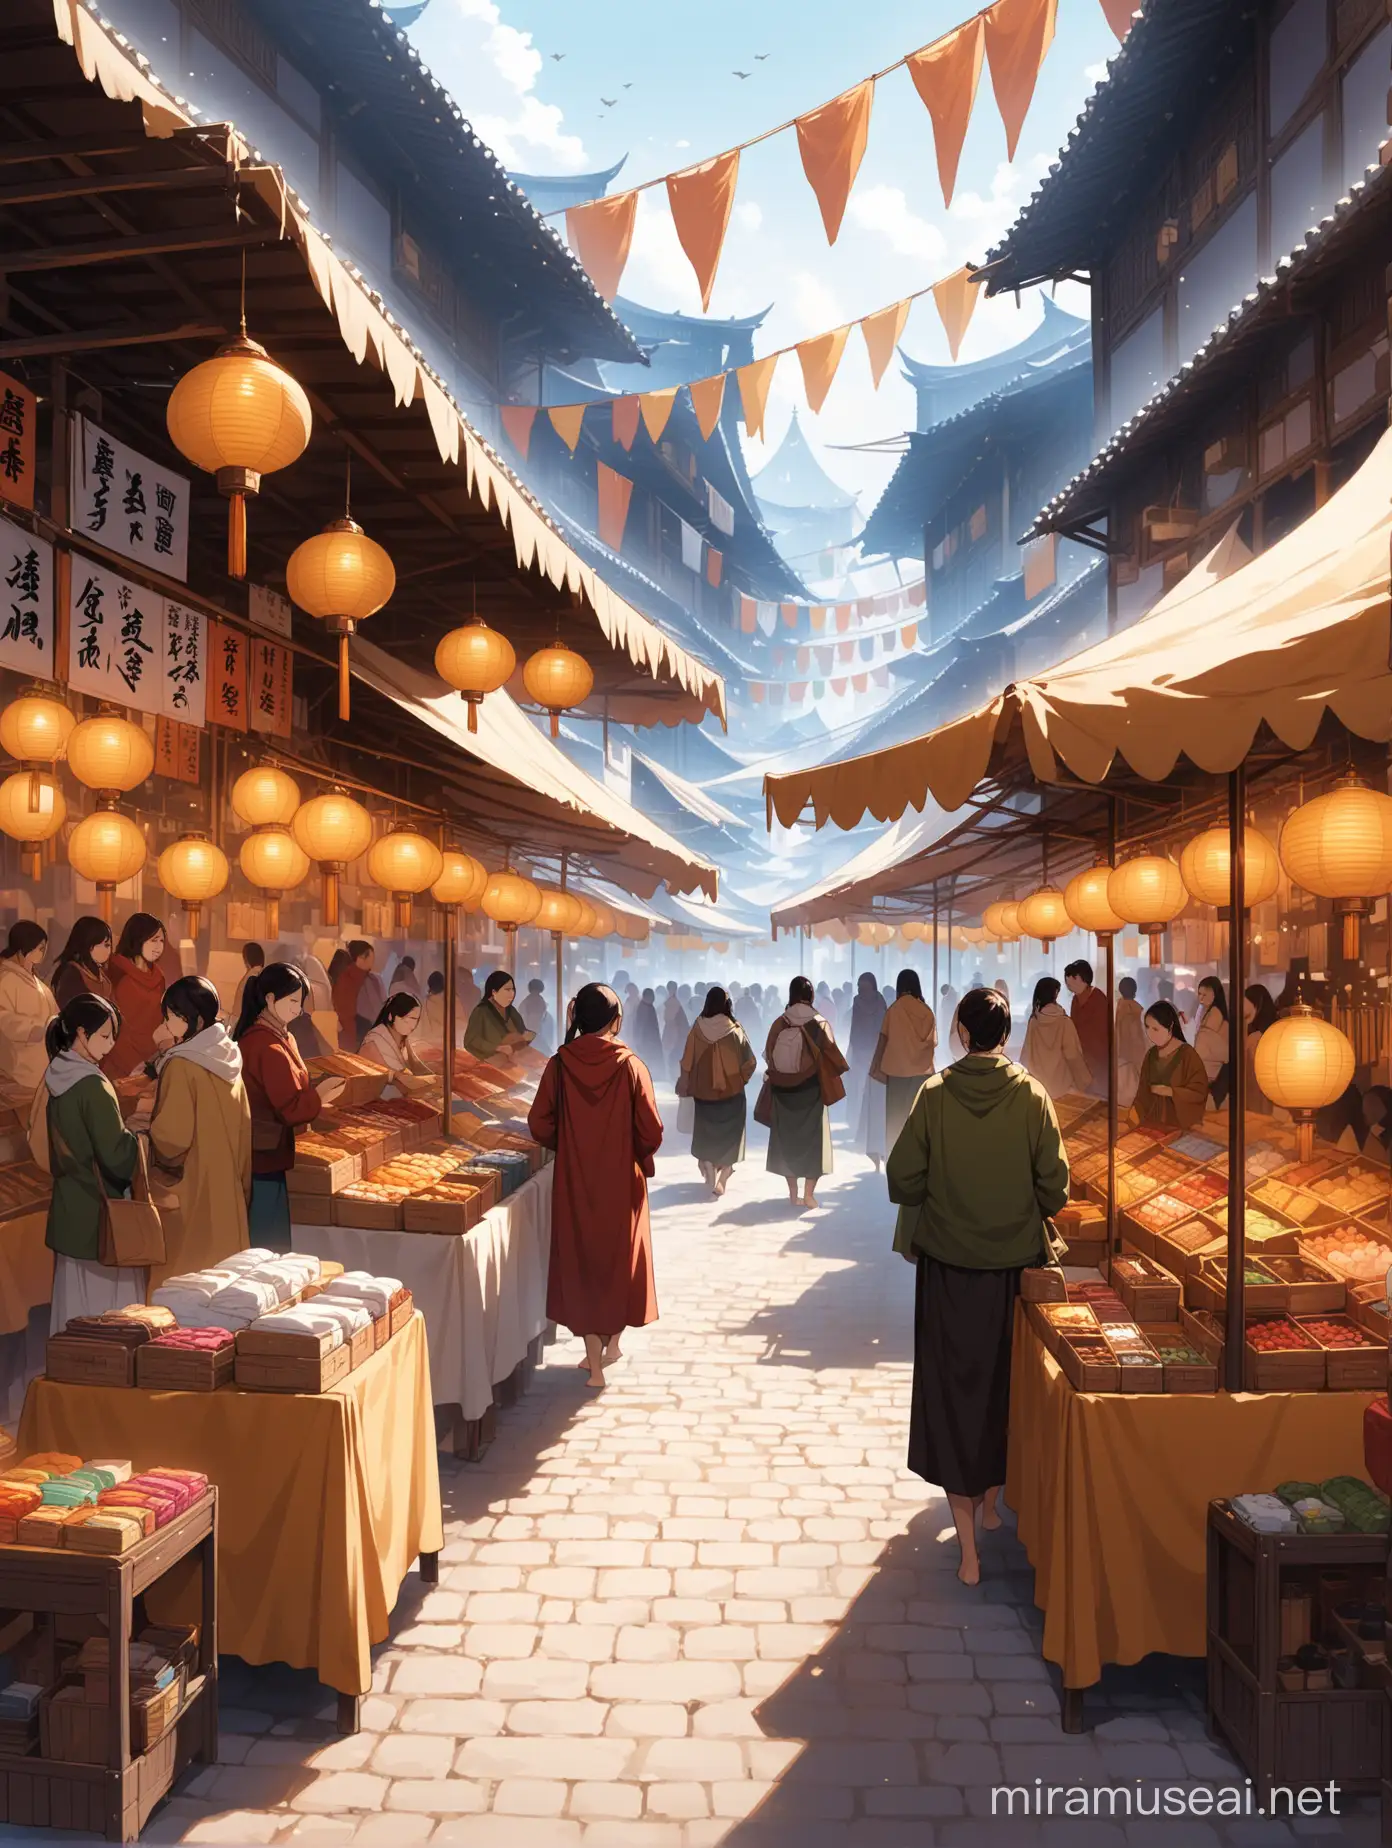  a marketplace bustling with activity, Stalls are filled with a variety of goods, Among them are items labeled with personal attributes such as time, talents, self-worth, and relationships.